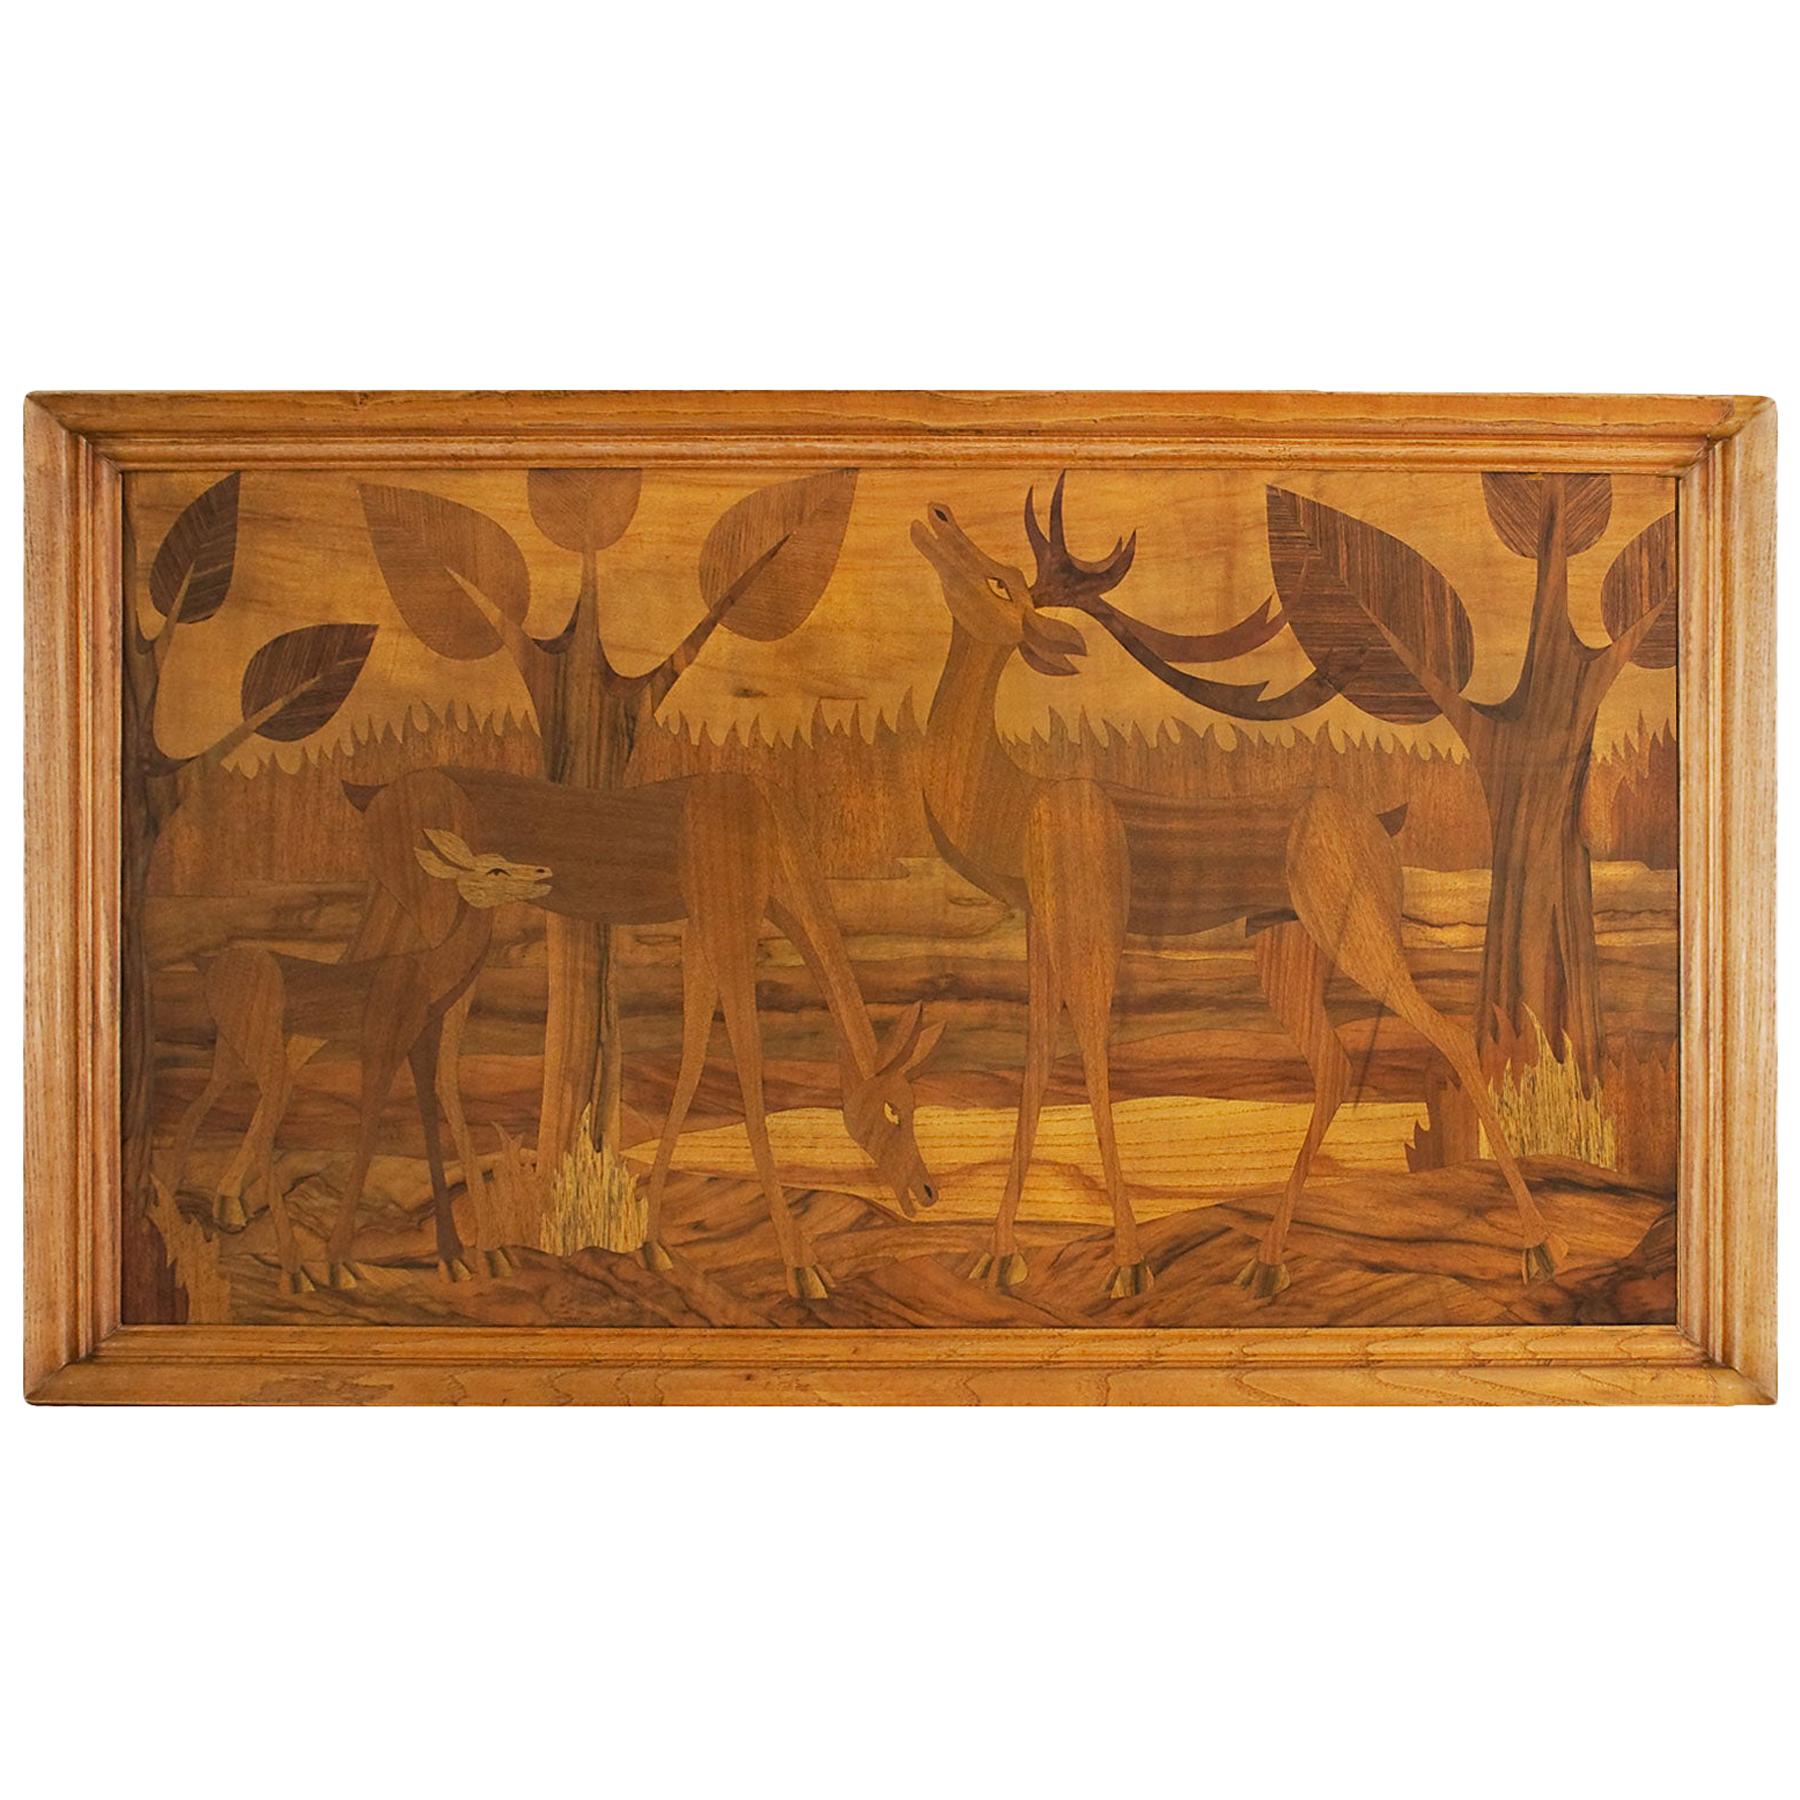 1930s Art Deco Decorative Panel in Wood Marquetry And Ash Frame - Italy For Sale